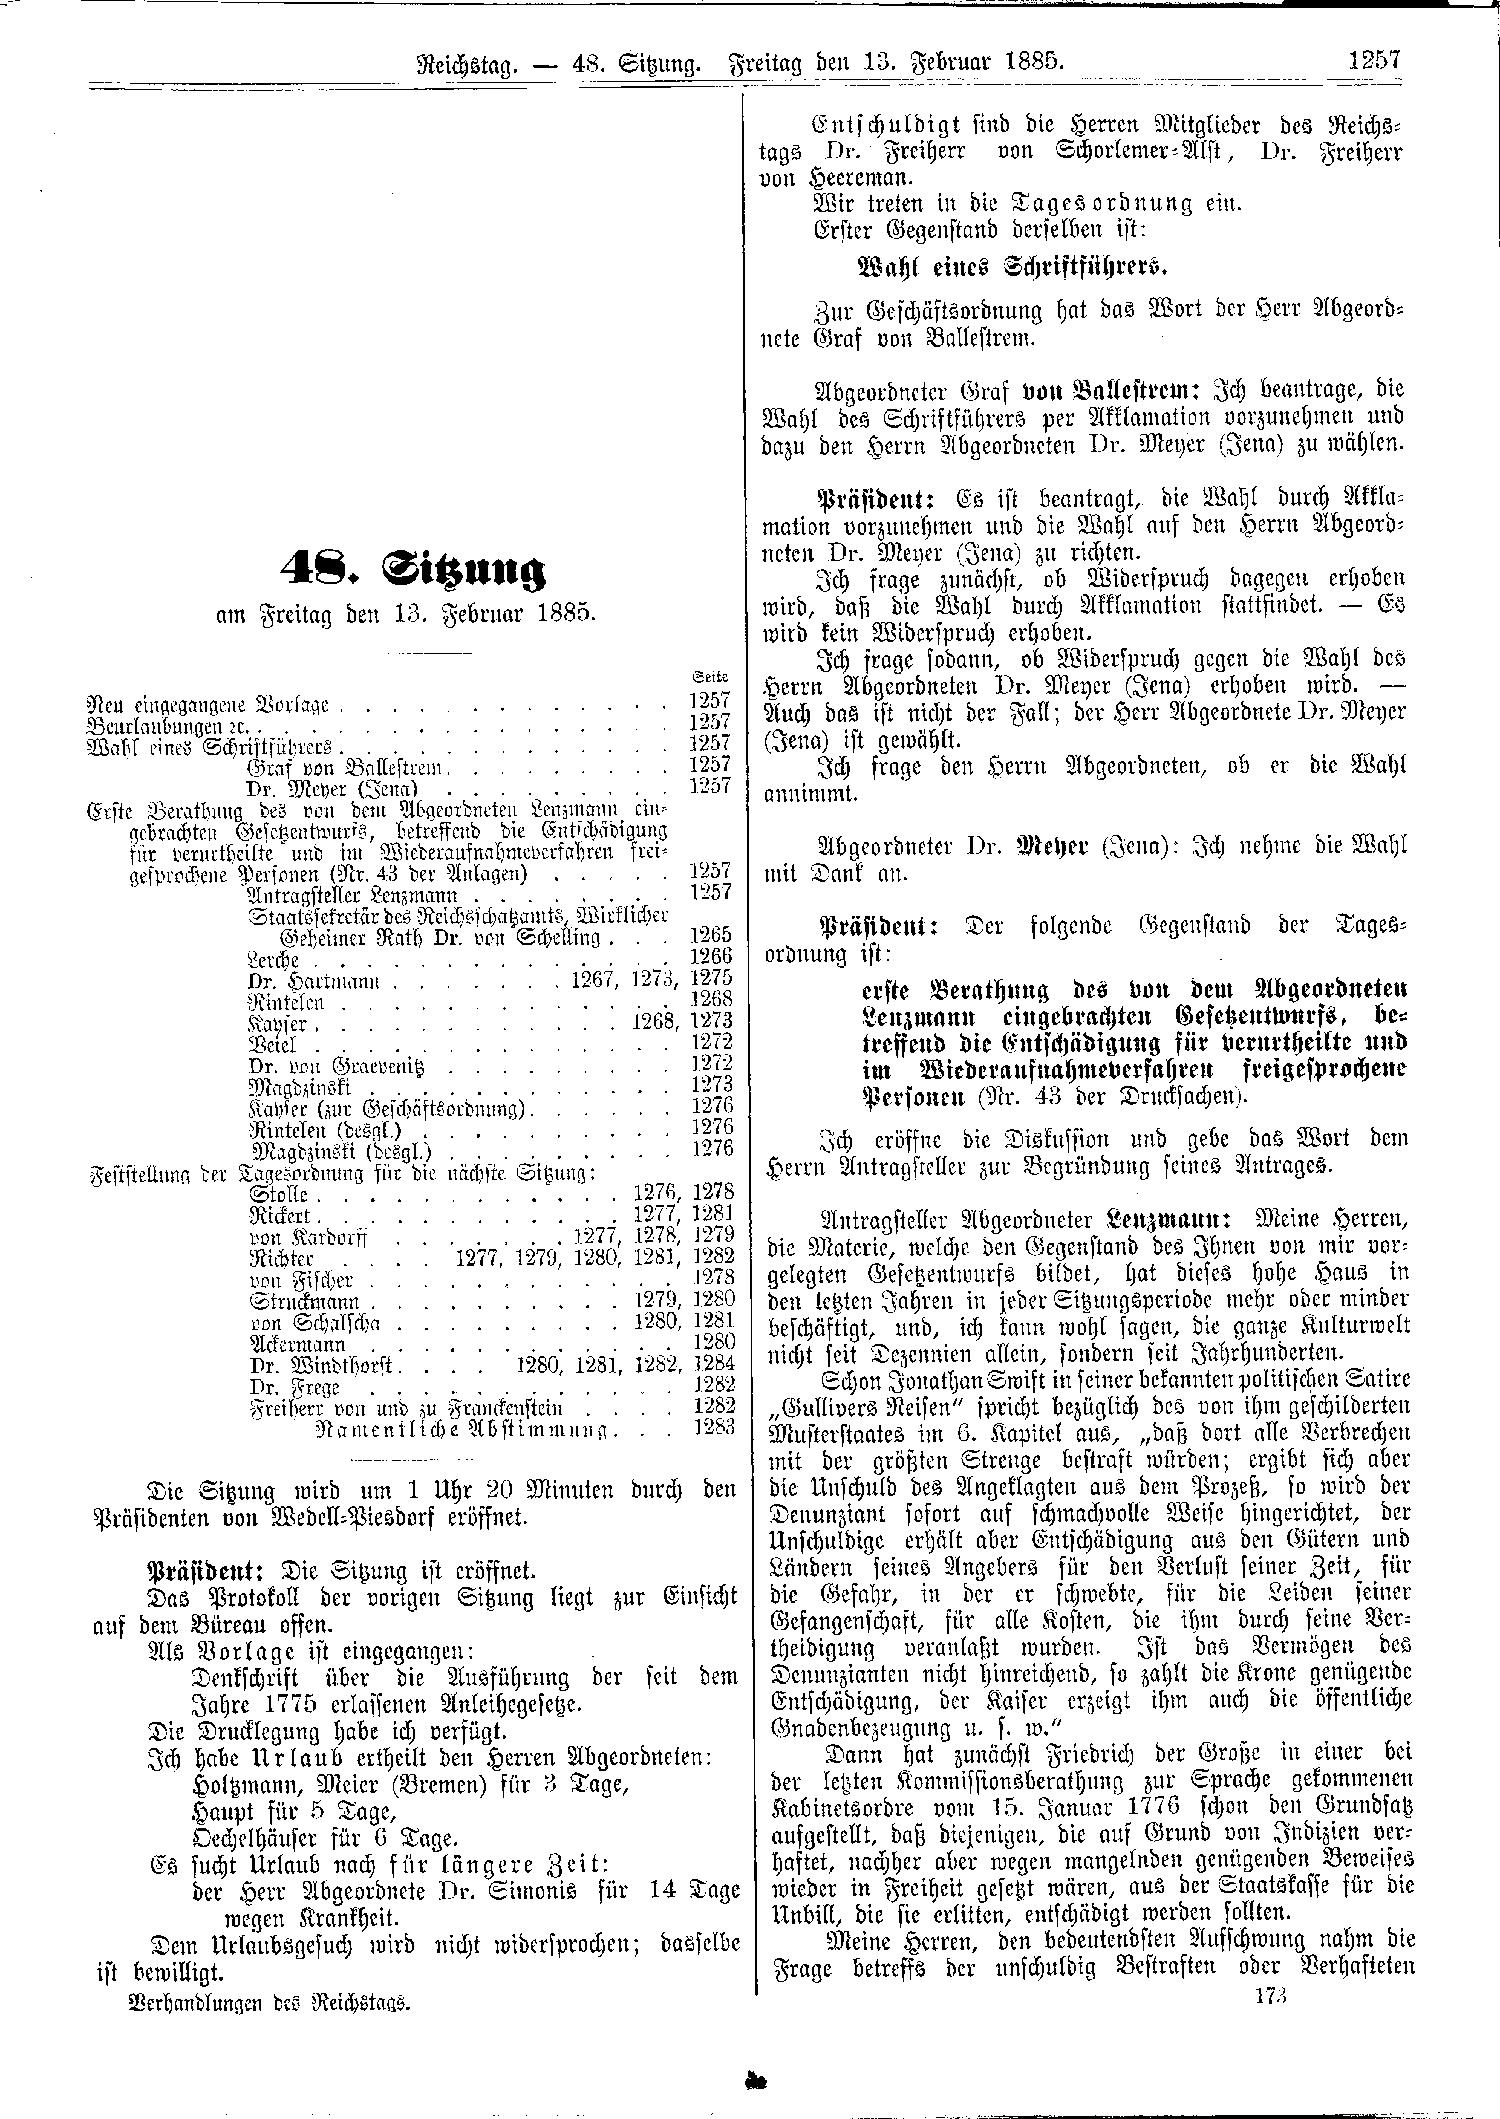 Scan of page 1257